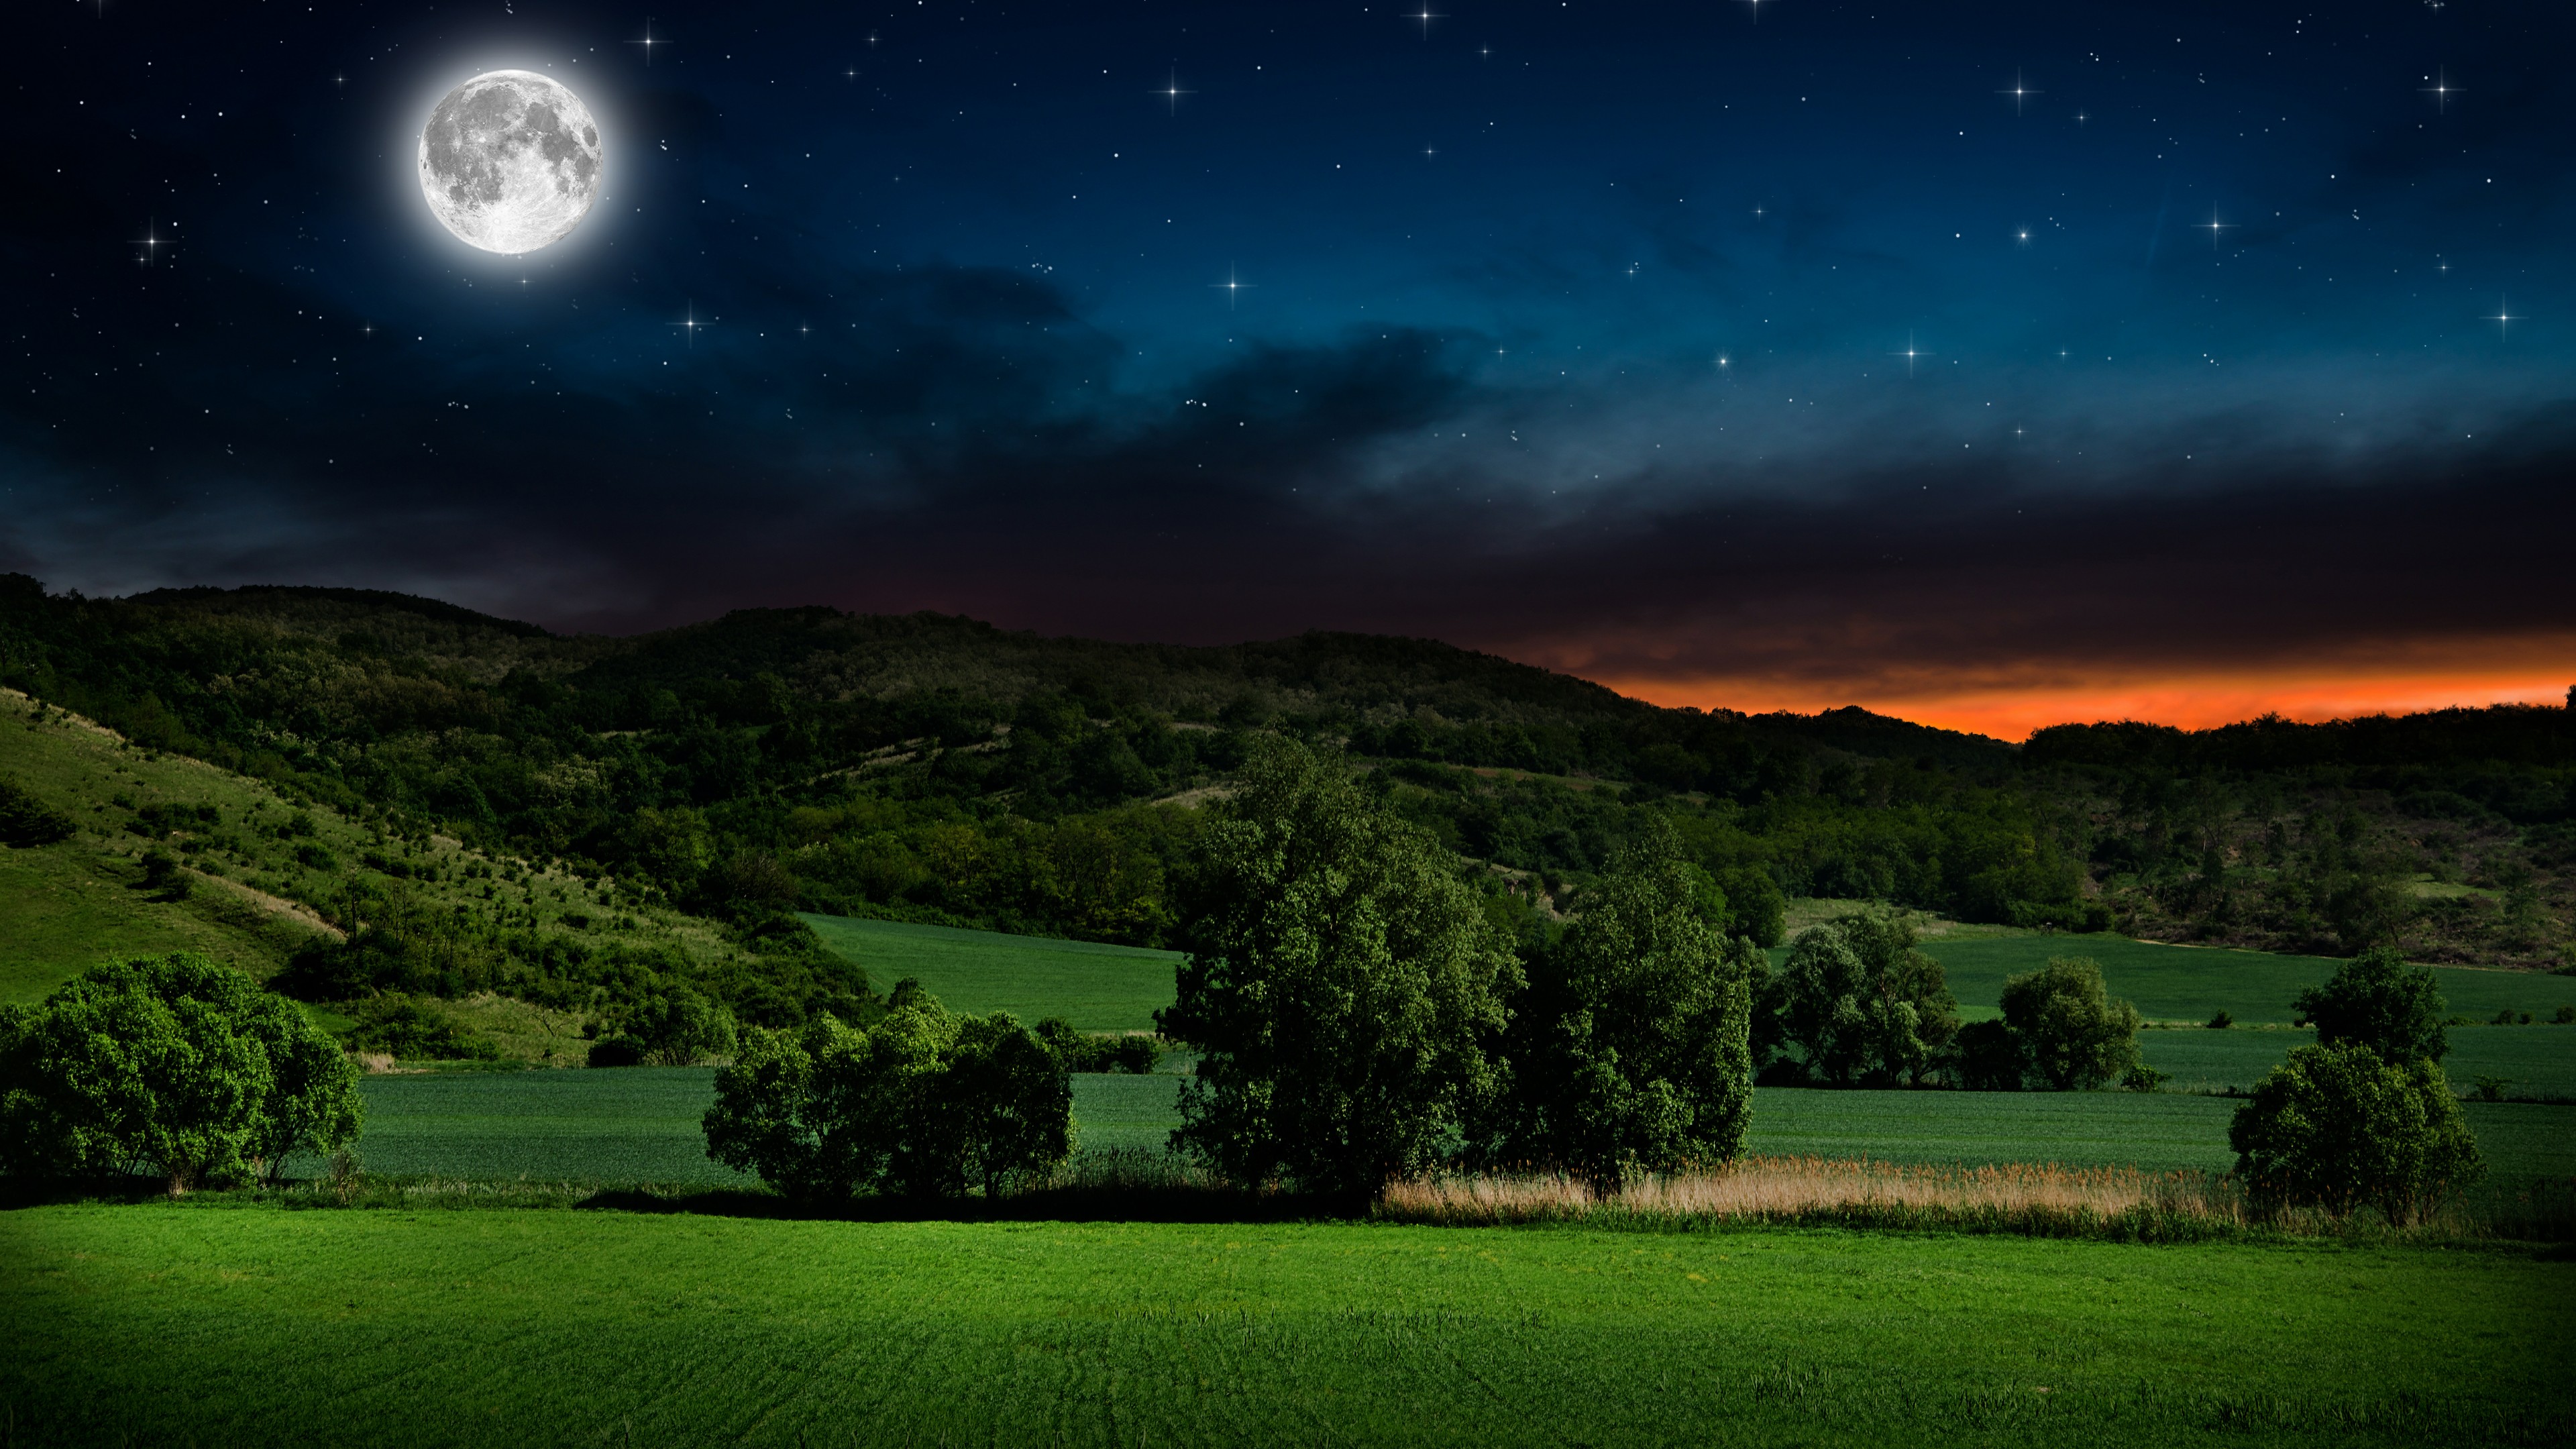 Full moon on the starry sky above the green hills wallpaper - backiee